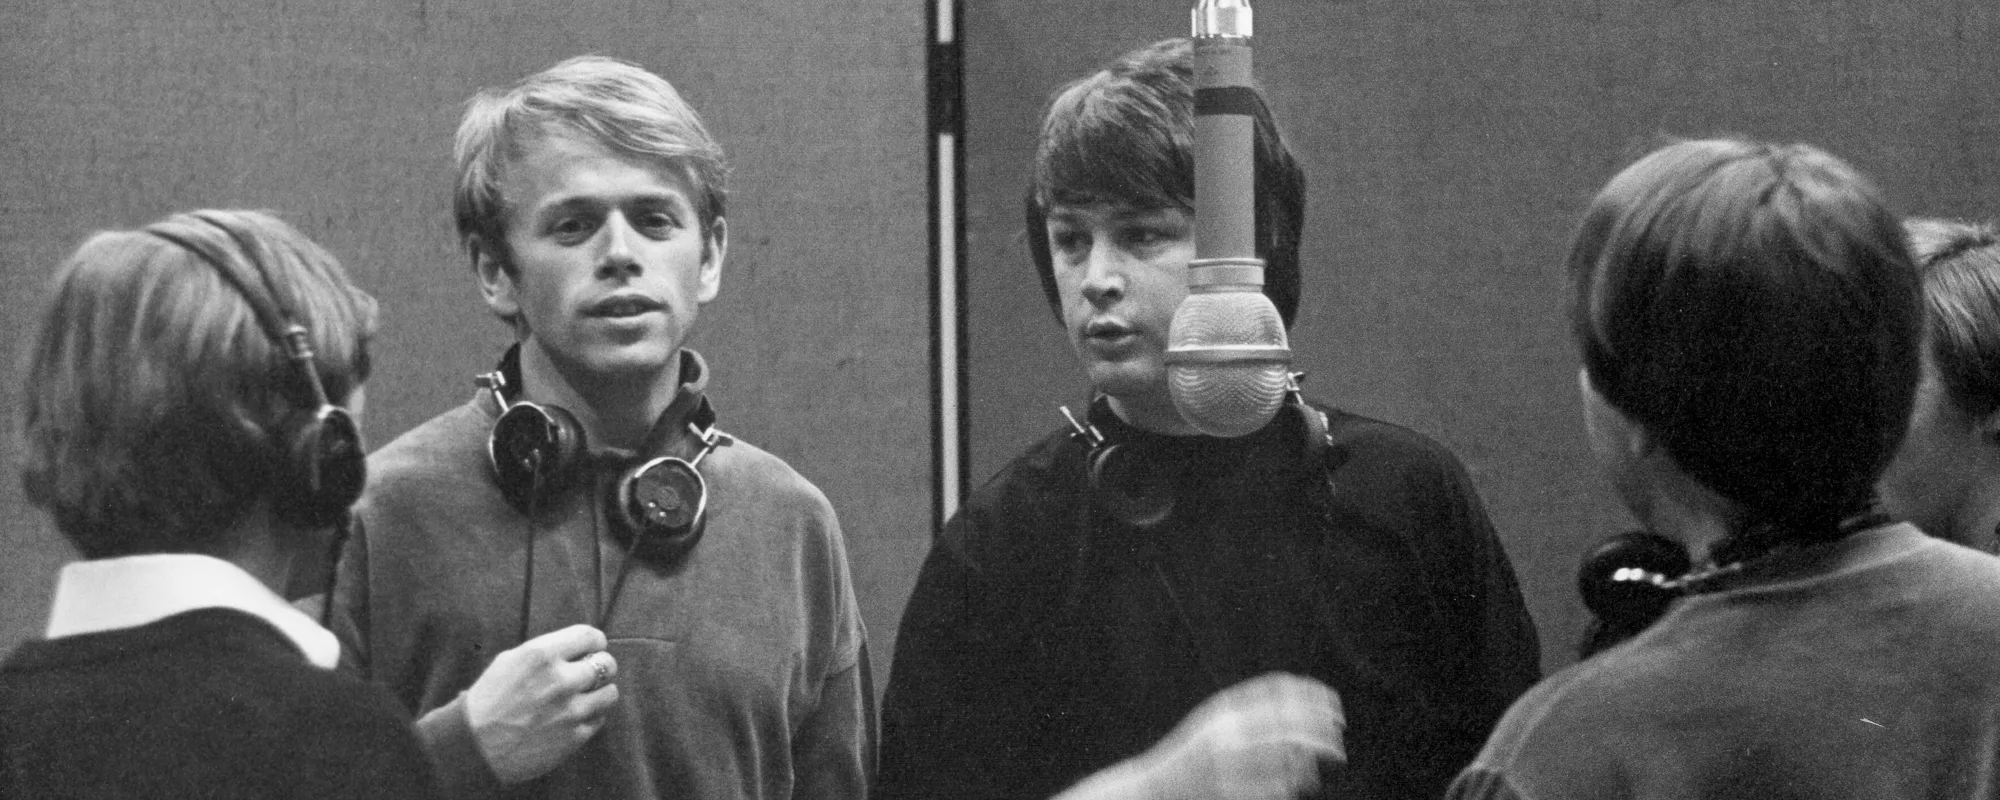 Ranking the 5 Best Songs on The Beach Boys’ Masterpiece ‘Pet Sounds’